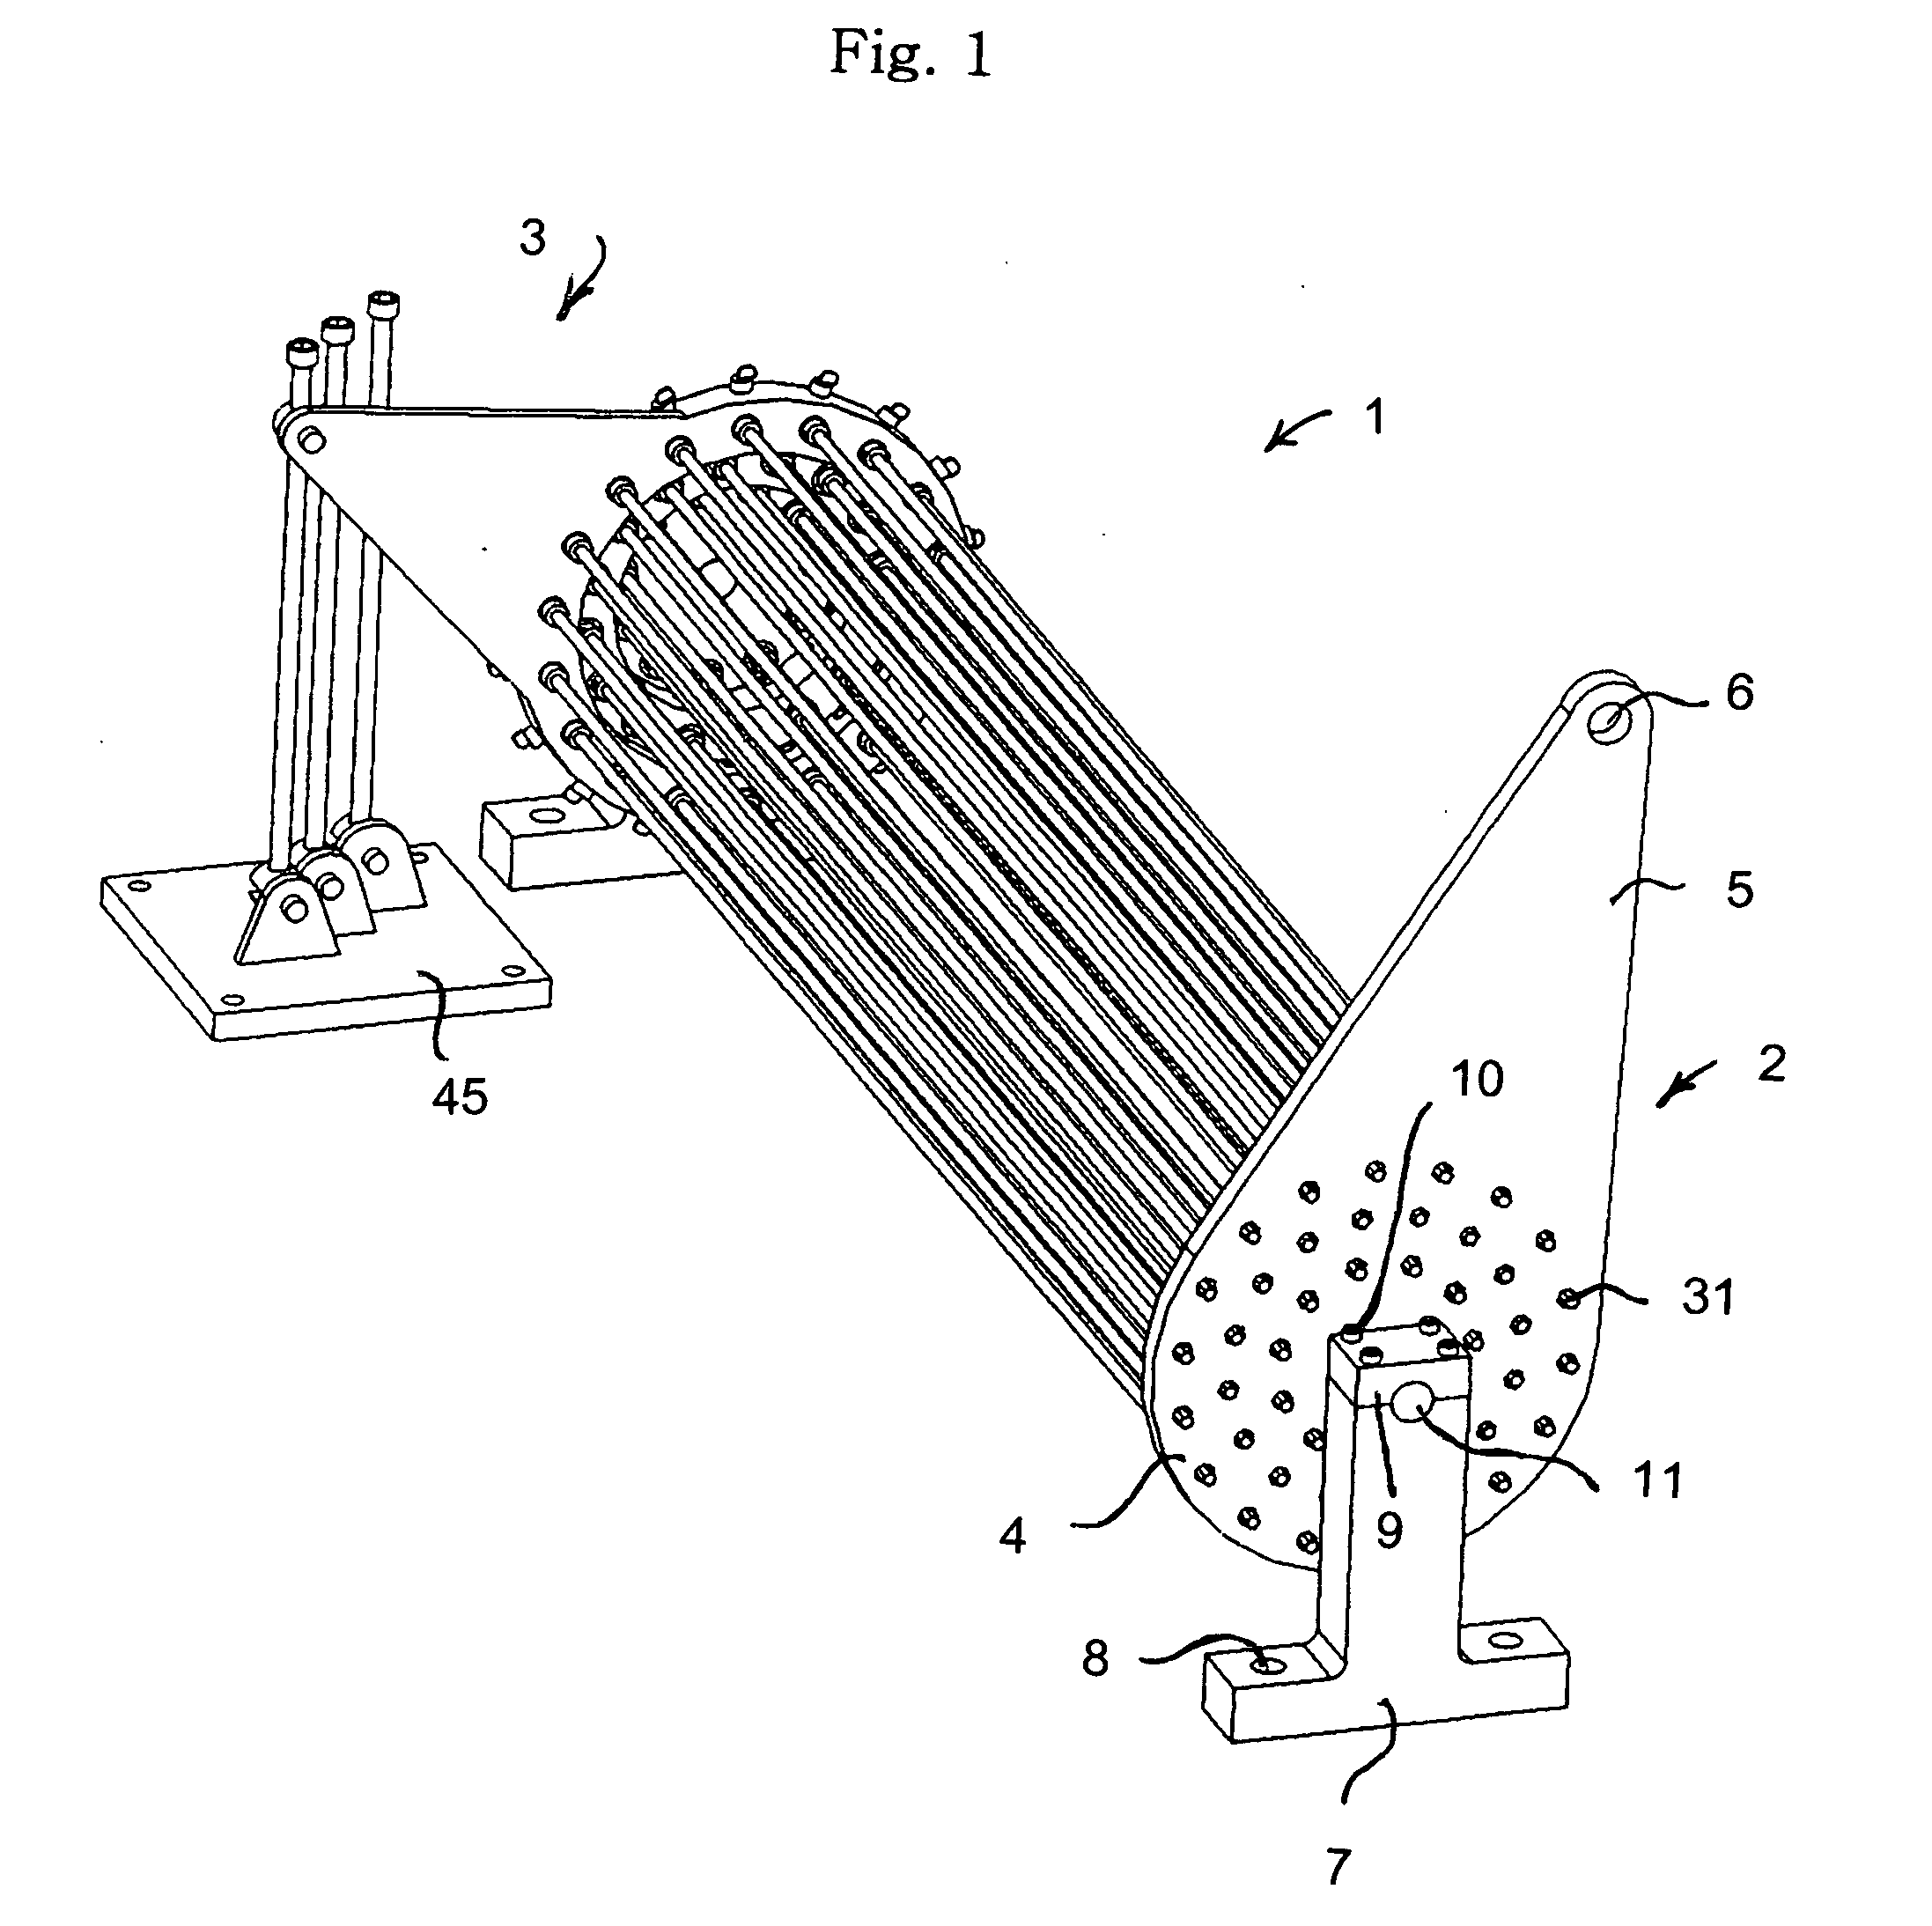 Non-helical torsion spring system